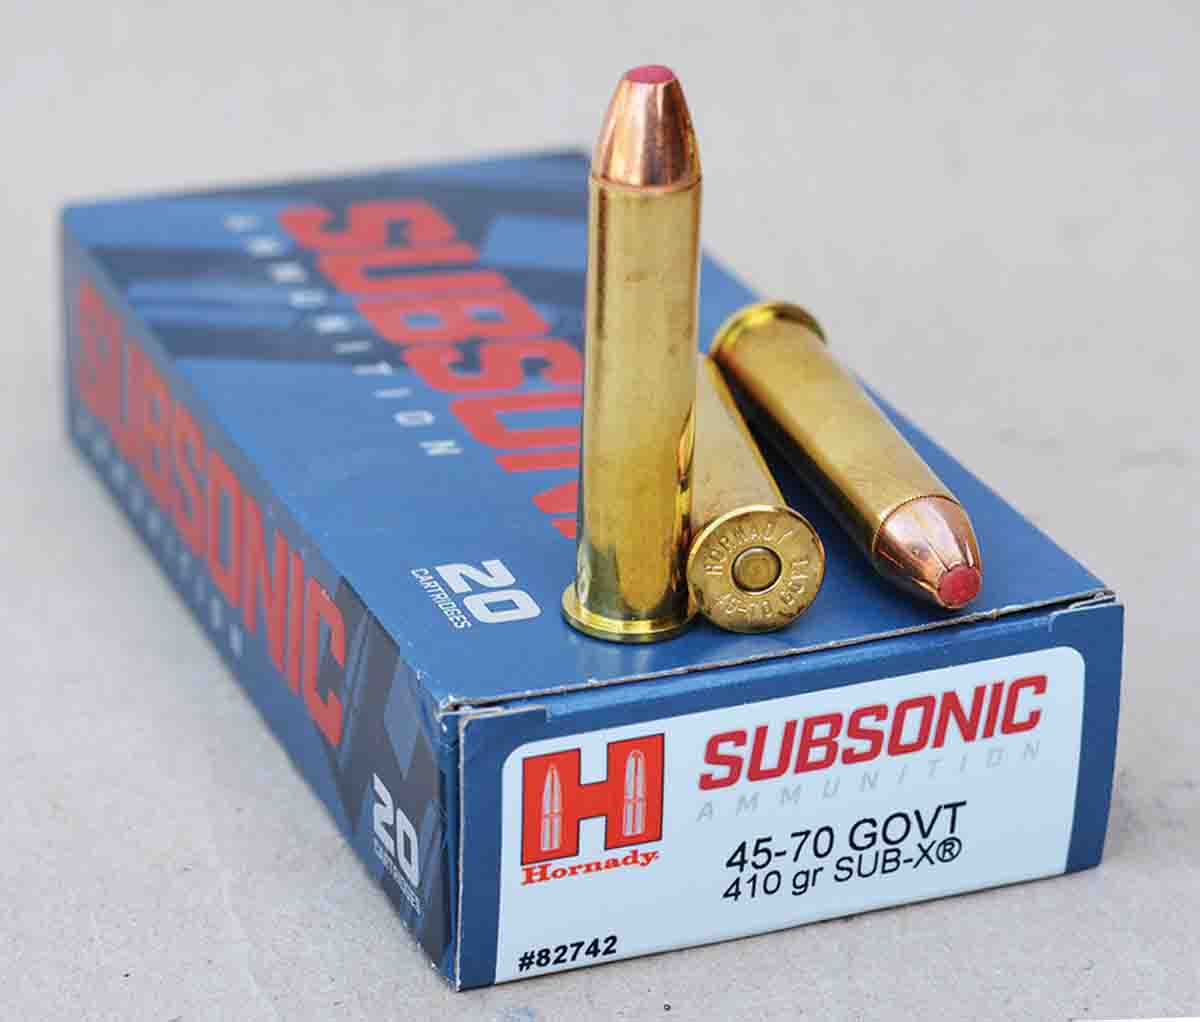 Hornady offers a 410-grain bullet at subsonic velocities, which is popular for riflemen that desire suppression.